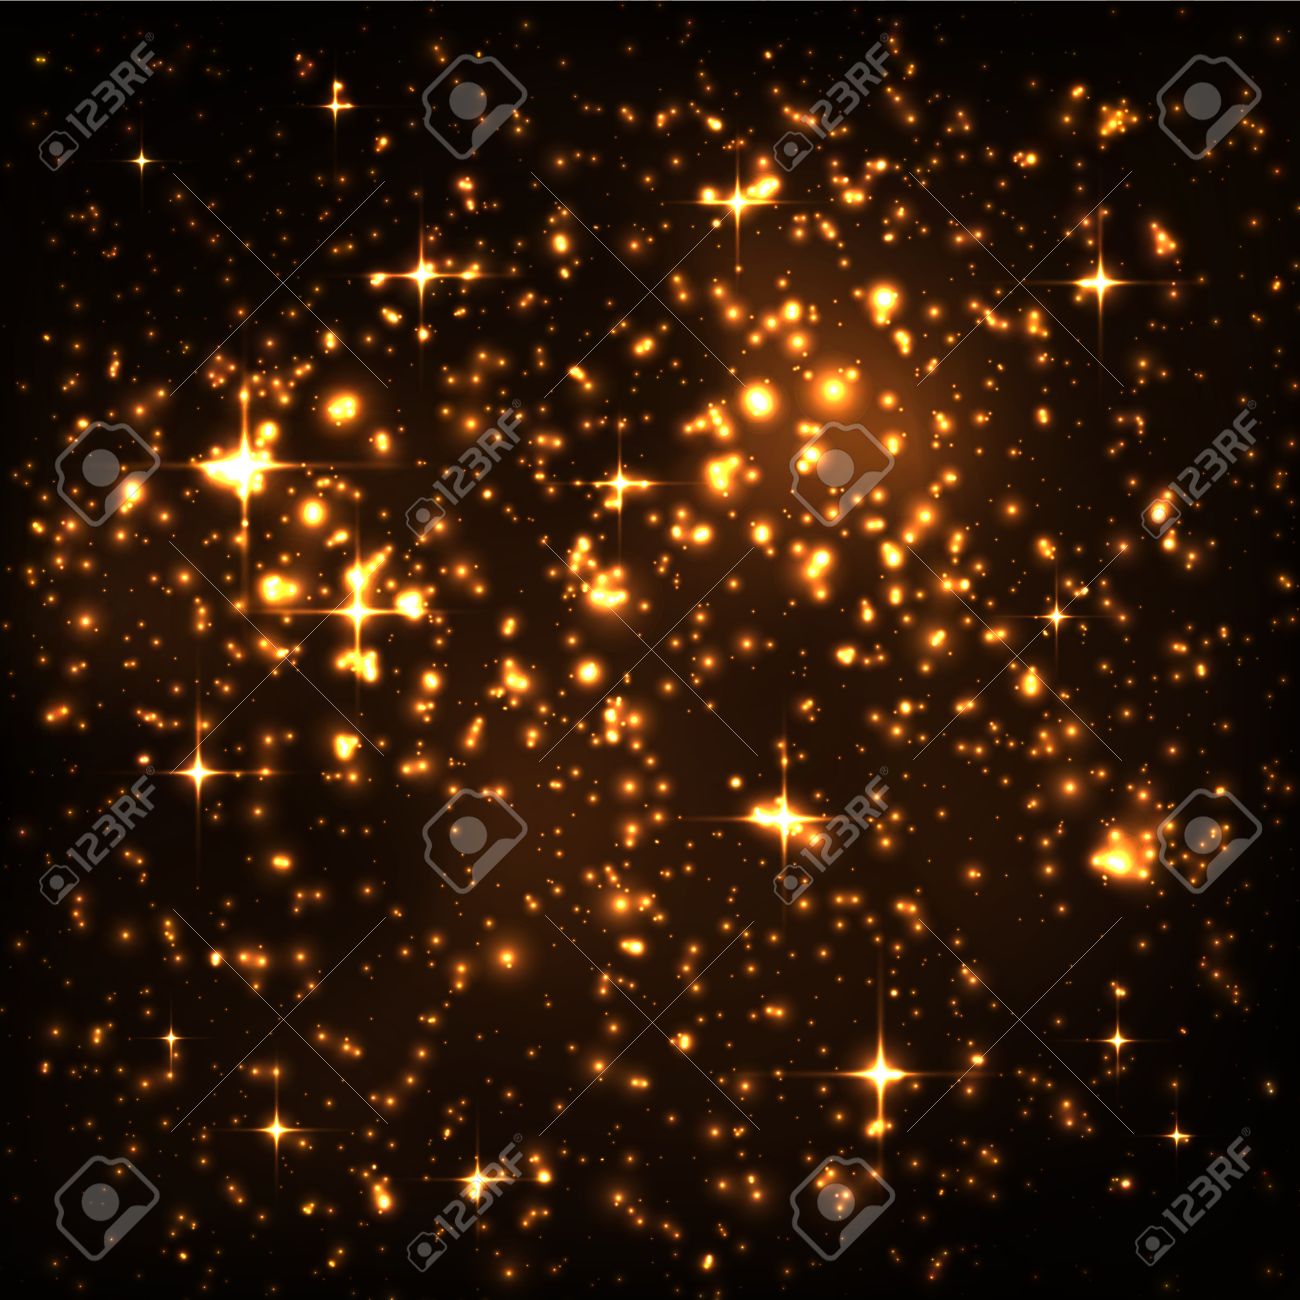 Abstract Night Sky With Golden Star Cluster And Glowing Particles